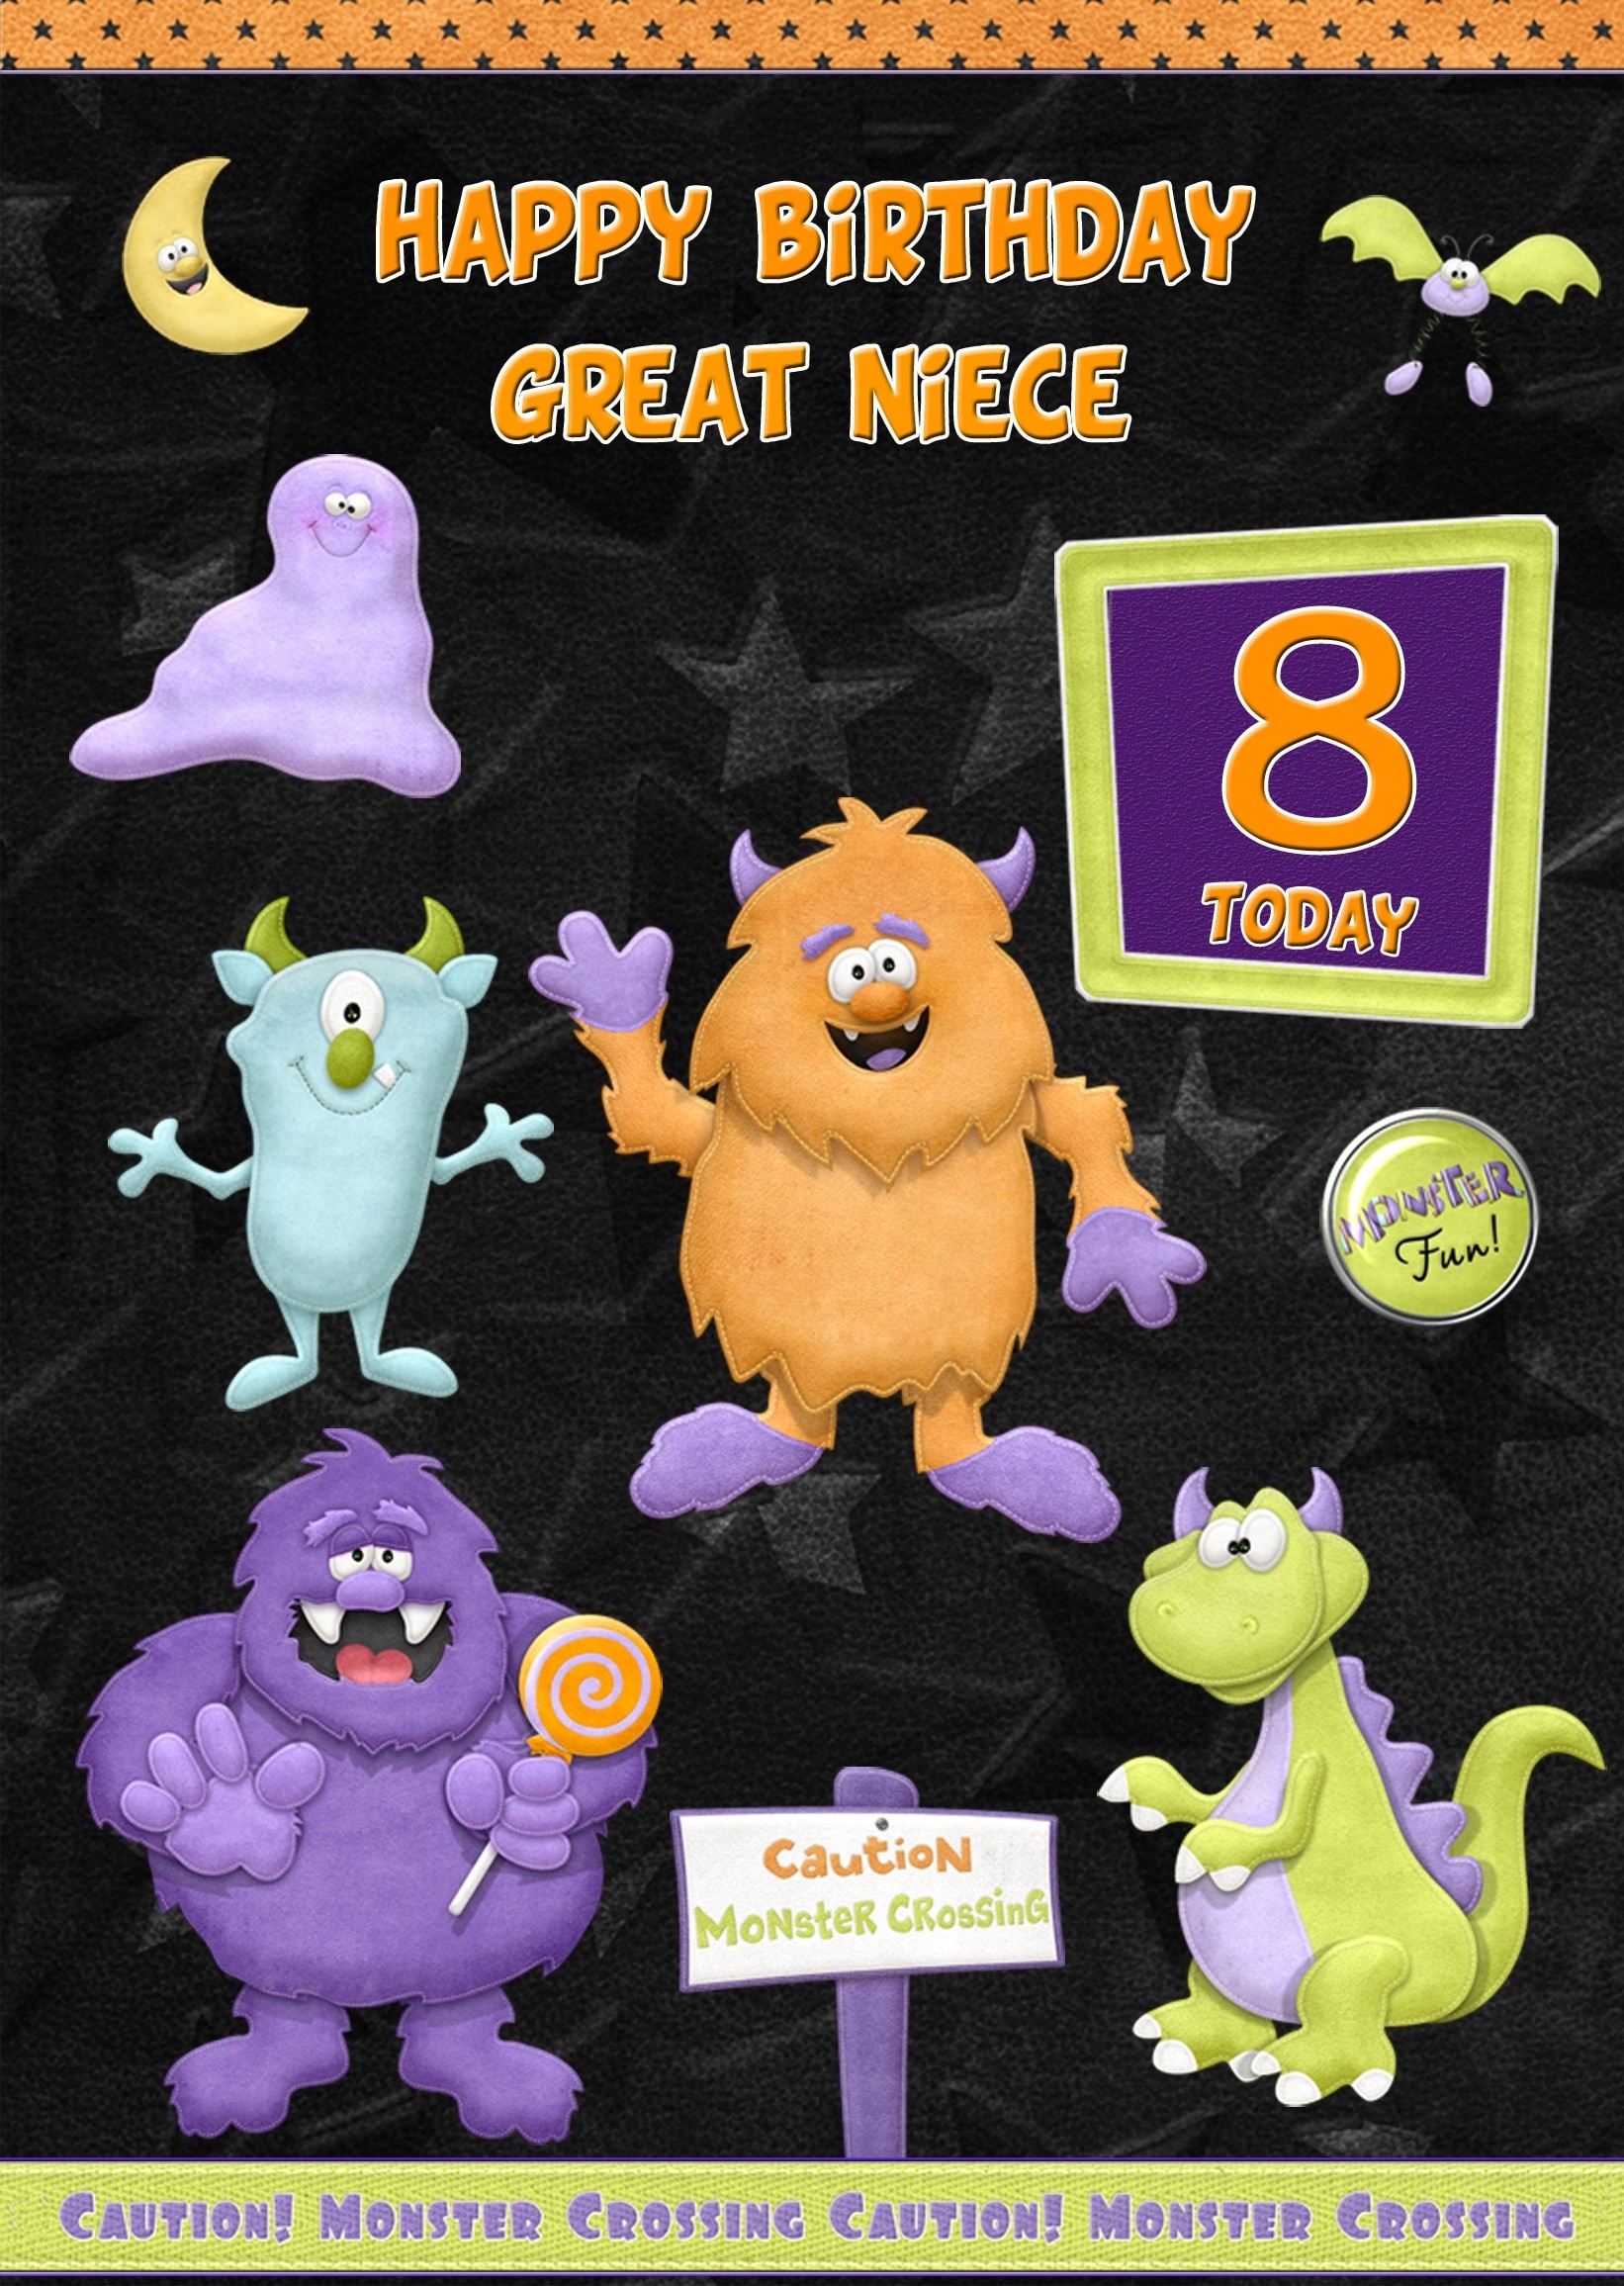 Kids 8th Birthday Funny Monster Cartoon Card for Great Niece